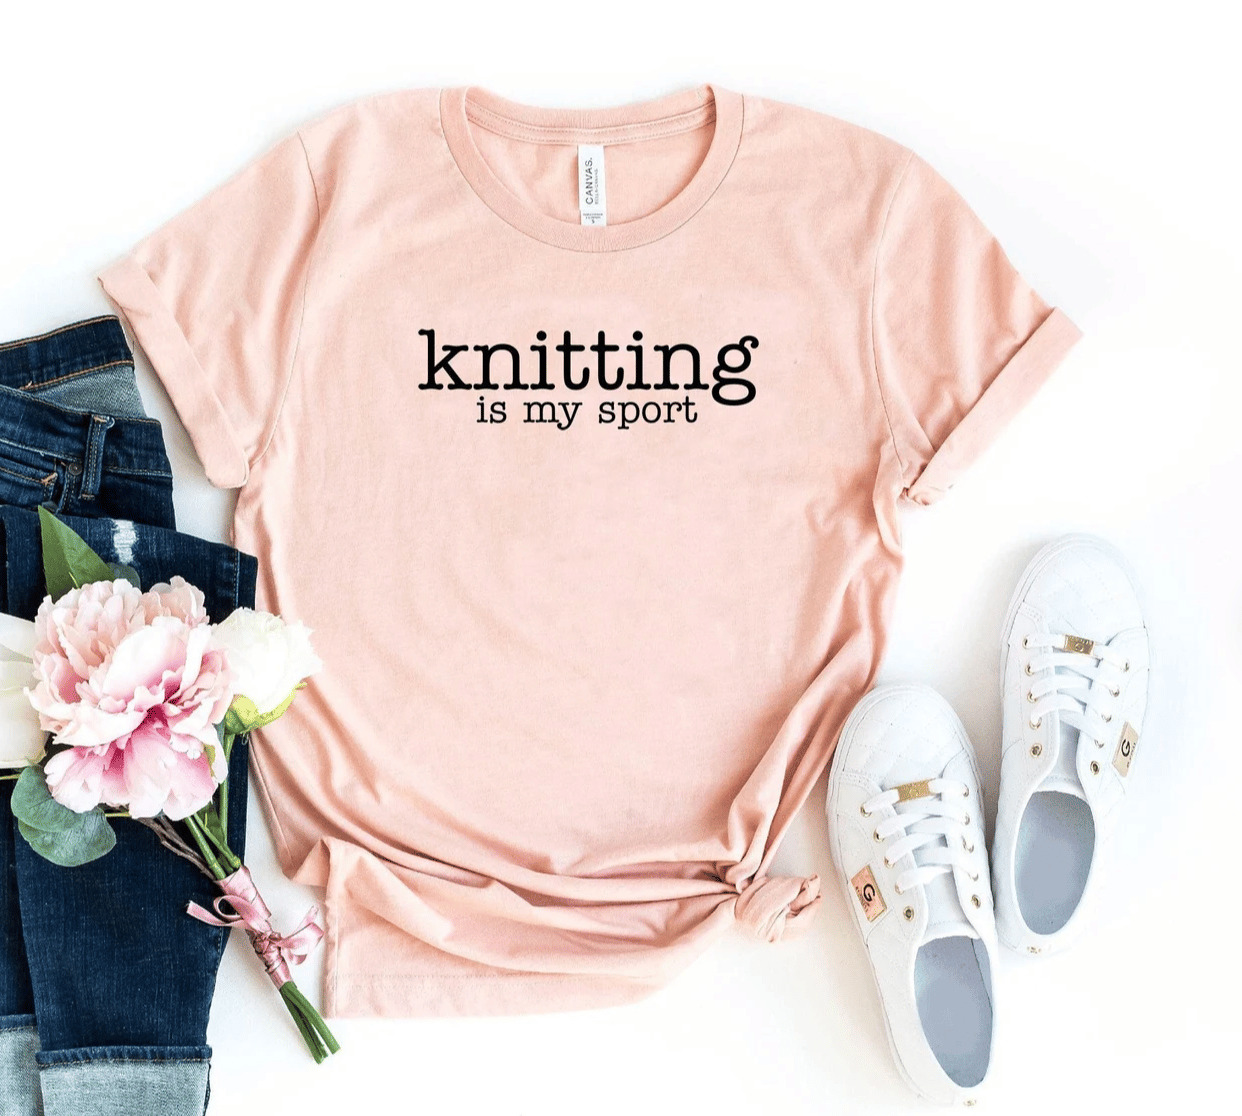 Just for you! 37 thoughtful gifts for knitters in 2024 - Gathered